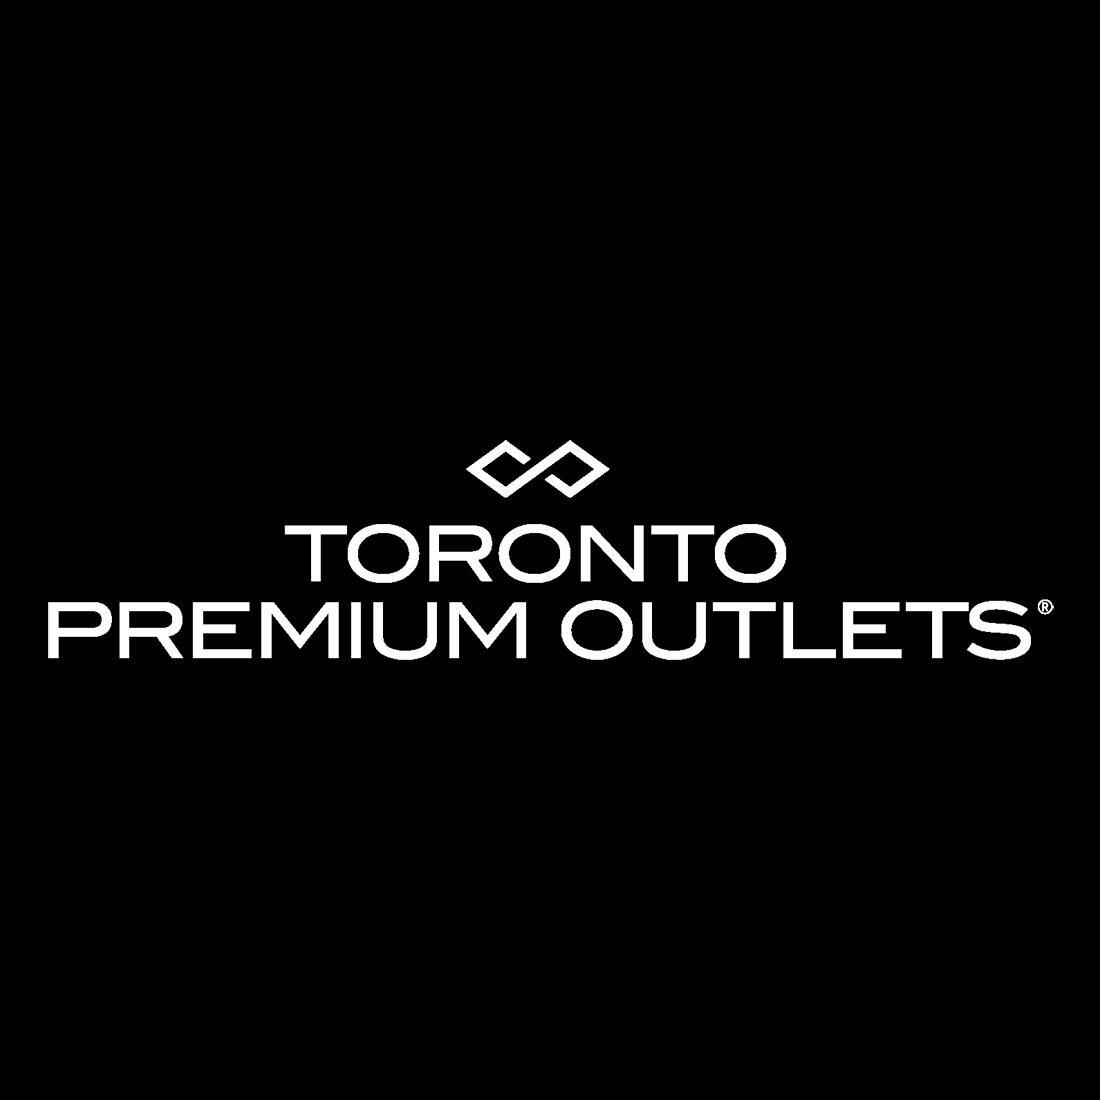 Toronto Premium Outlets  The latest signature styles from Michael Kors  bundle up for a luxe country getaway Shop the collection in store now  while enjoying up to 70 off  Facebook